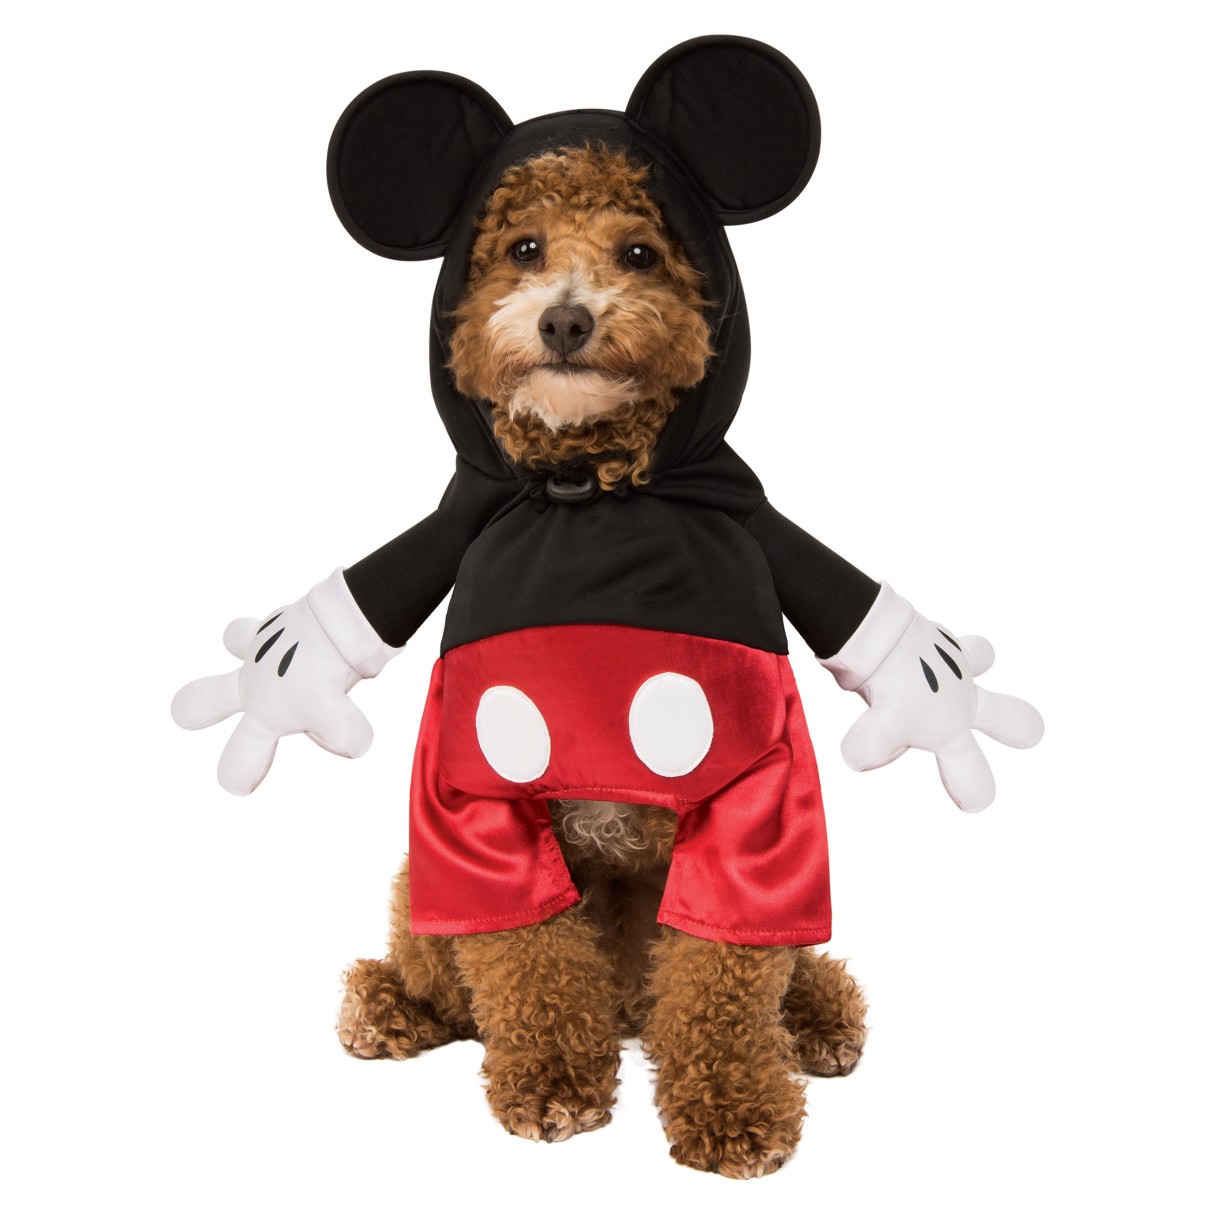 Mickey Mouse Pet Costume by Rubie's